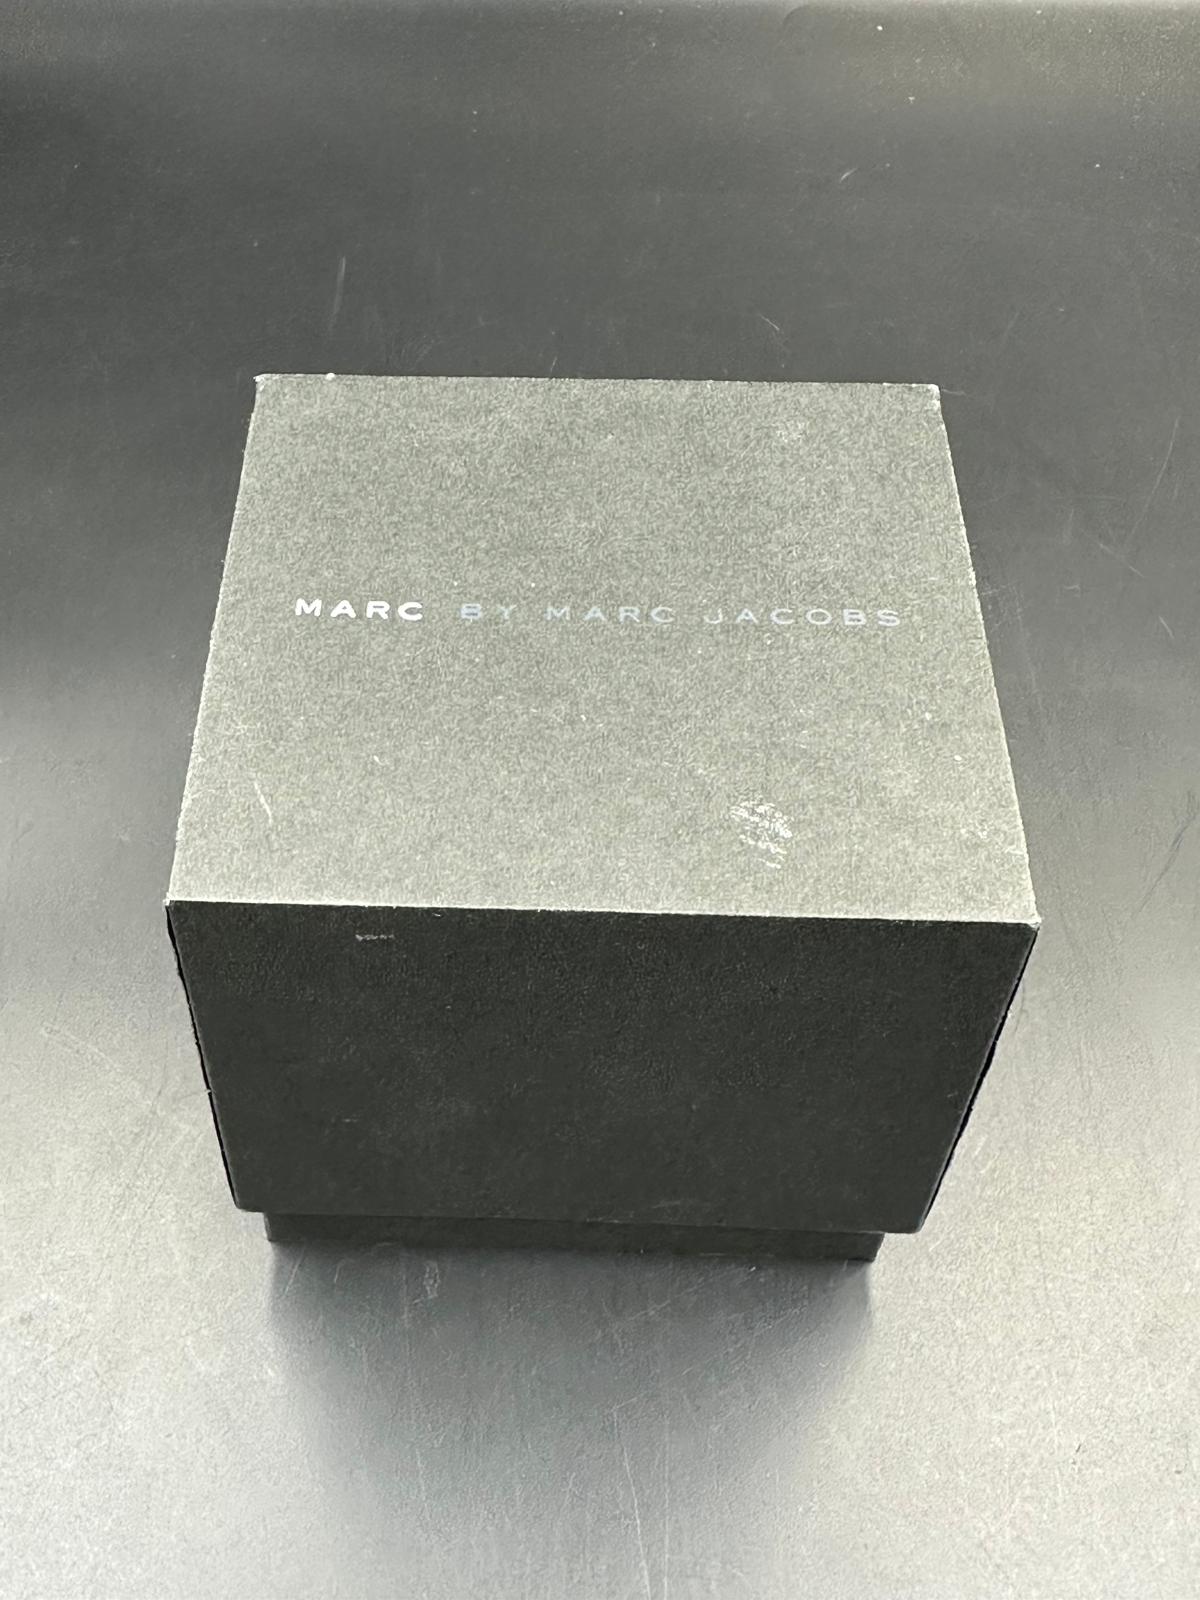 A Marc by Marc Jacobs stainless steel watch in original box with papers. - Image 2 of 3